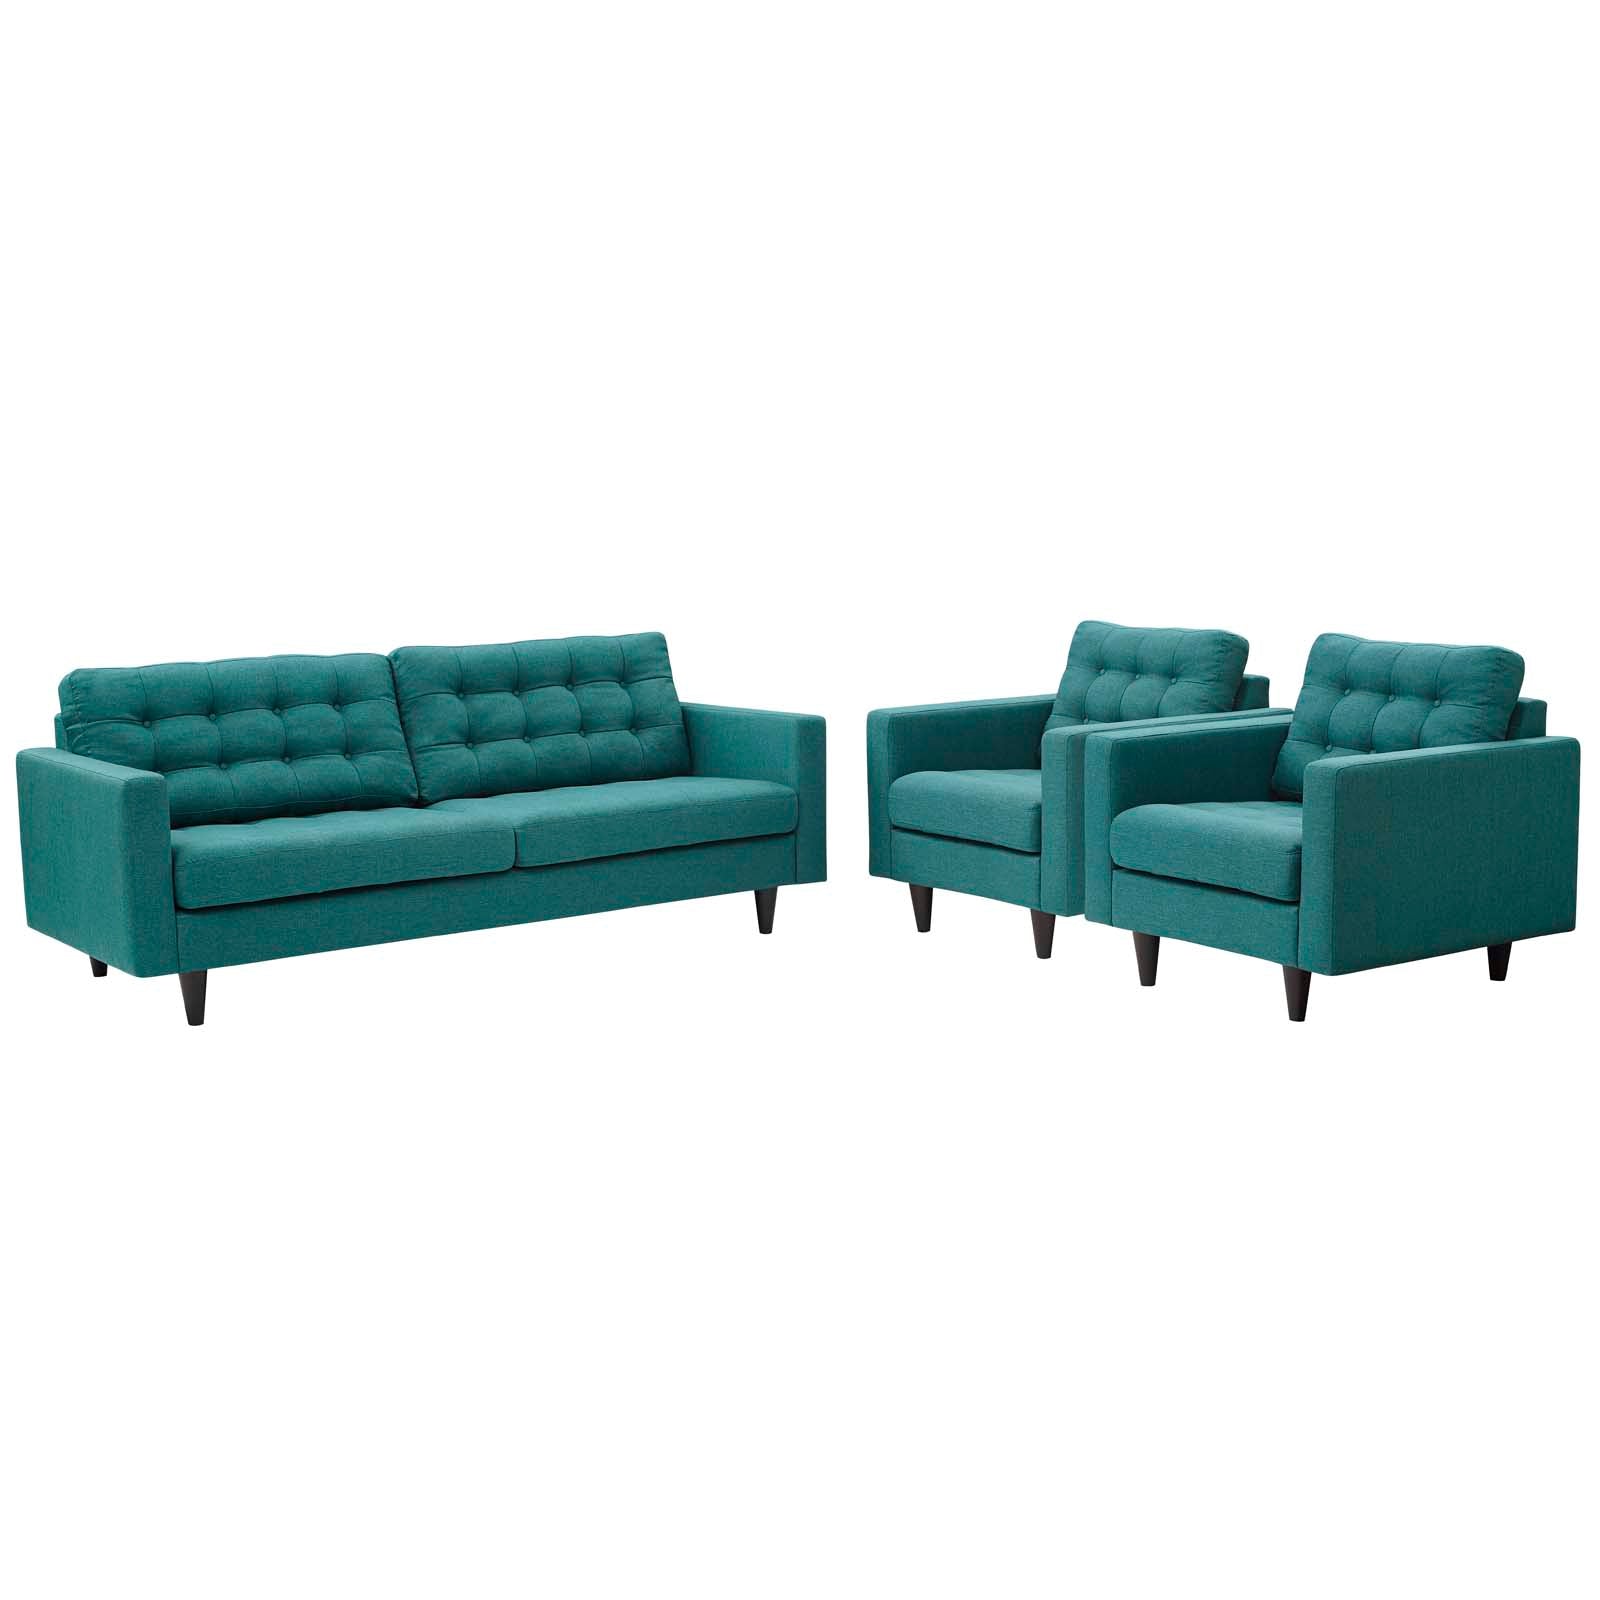 Empress Sofa and Armchairs Set of 3 - East Shore Modern Home Furnishings